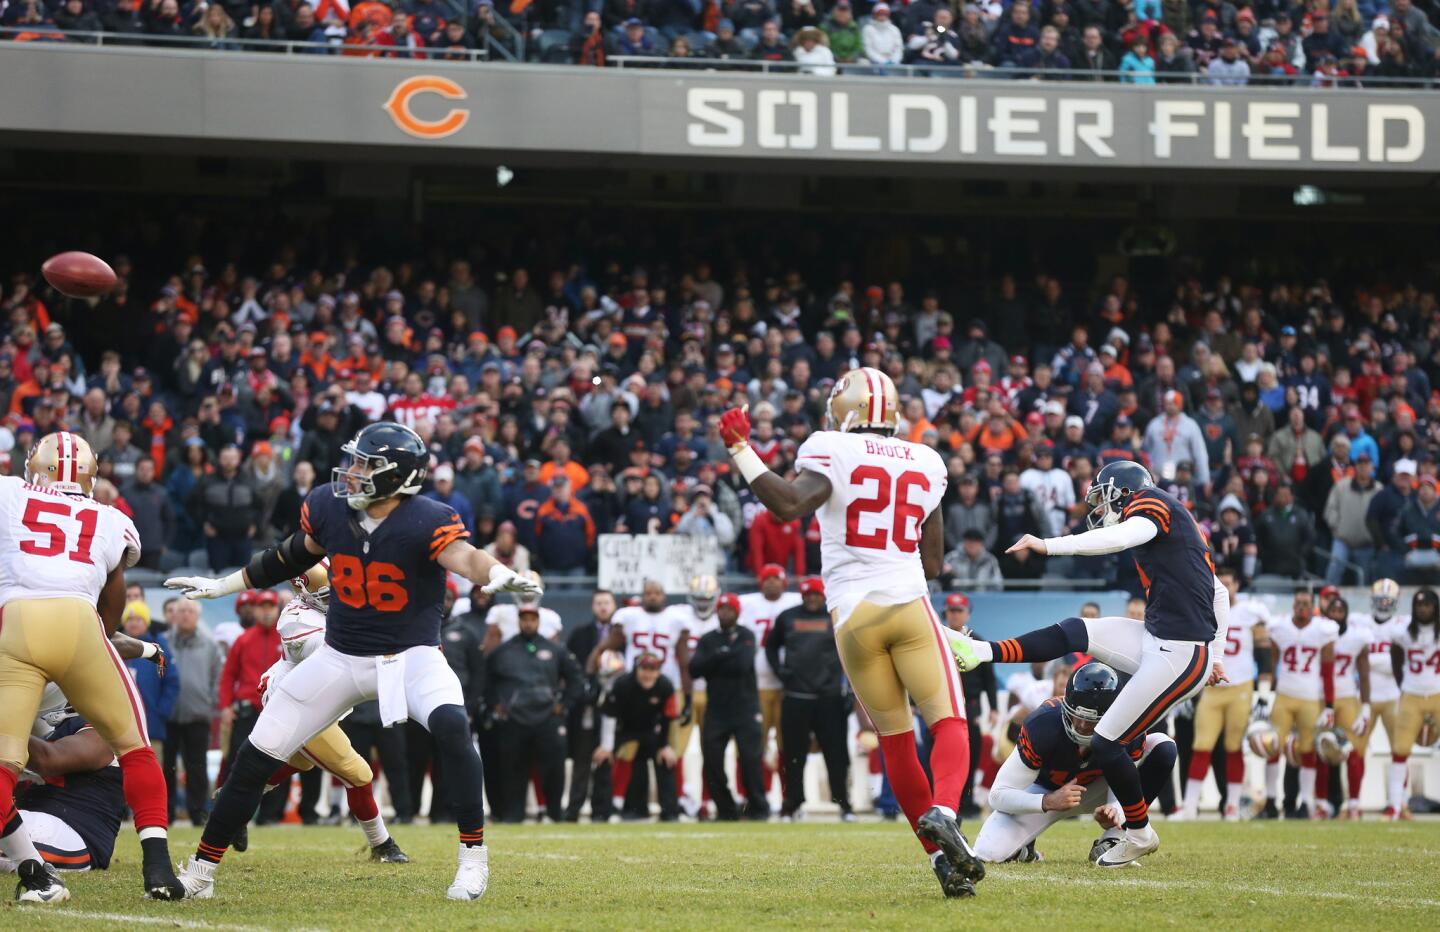 Robbie Gould kicks and misses a 36-yard field goal attempt at the end of regulation against the 49ers.